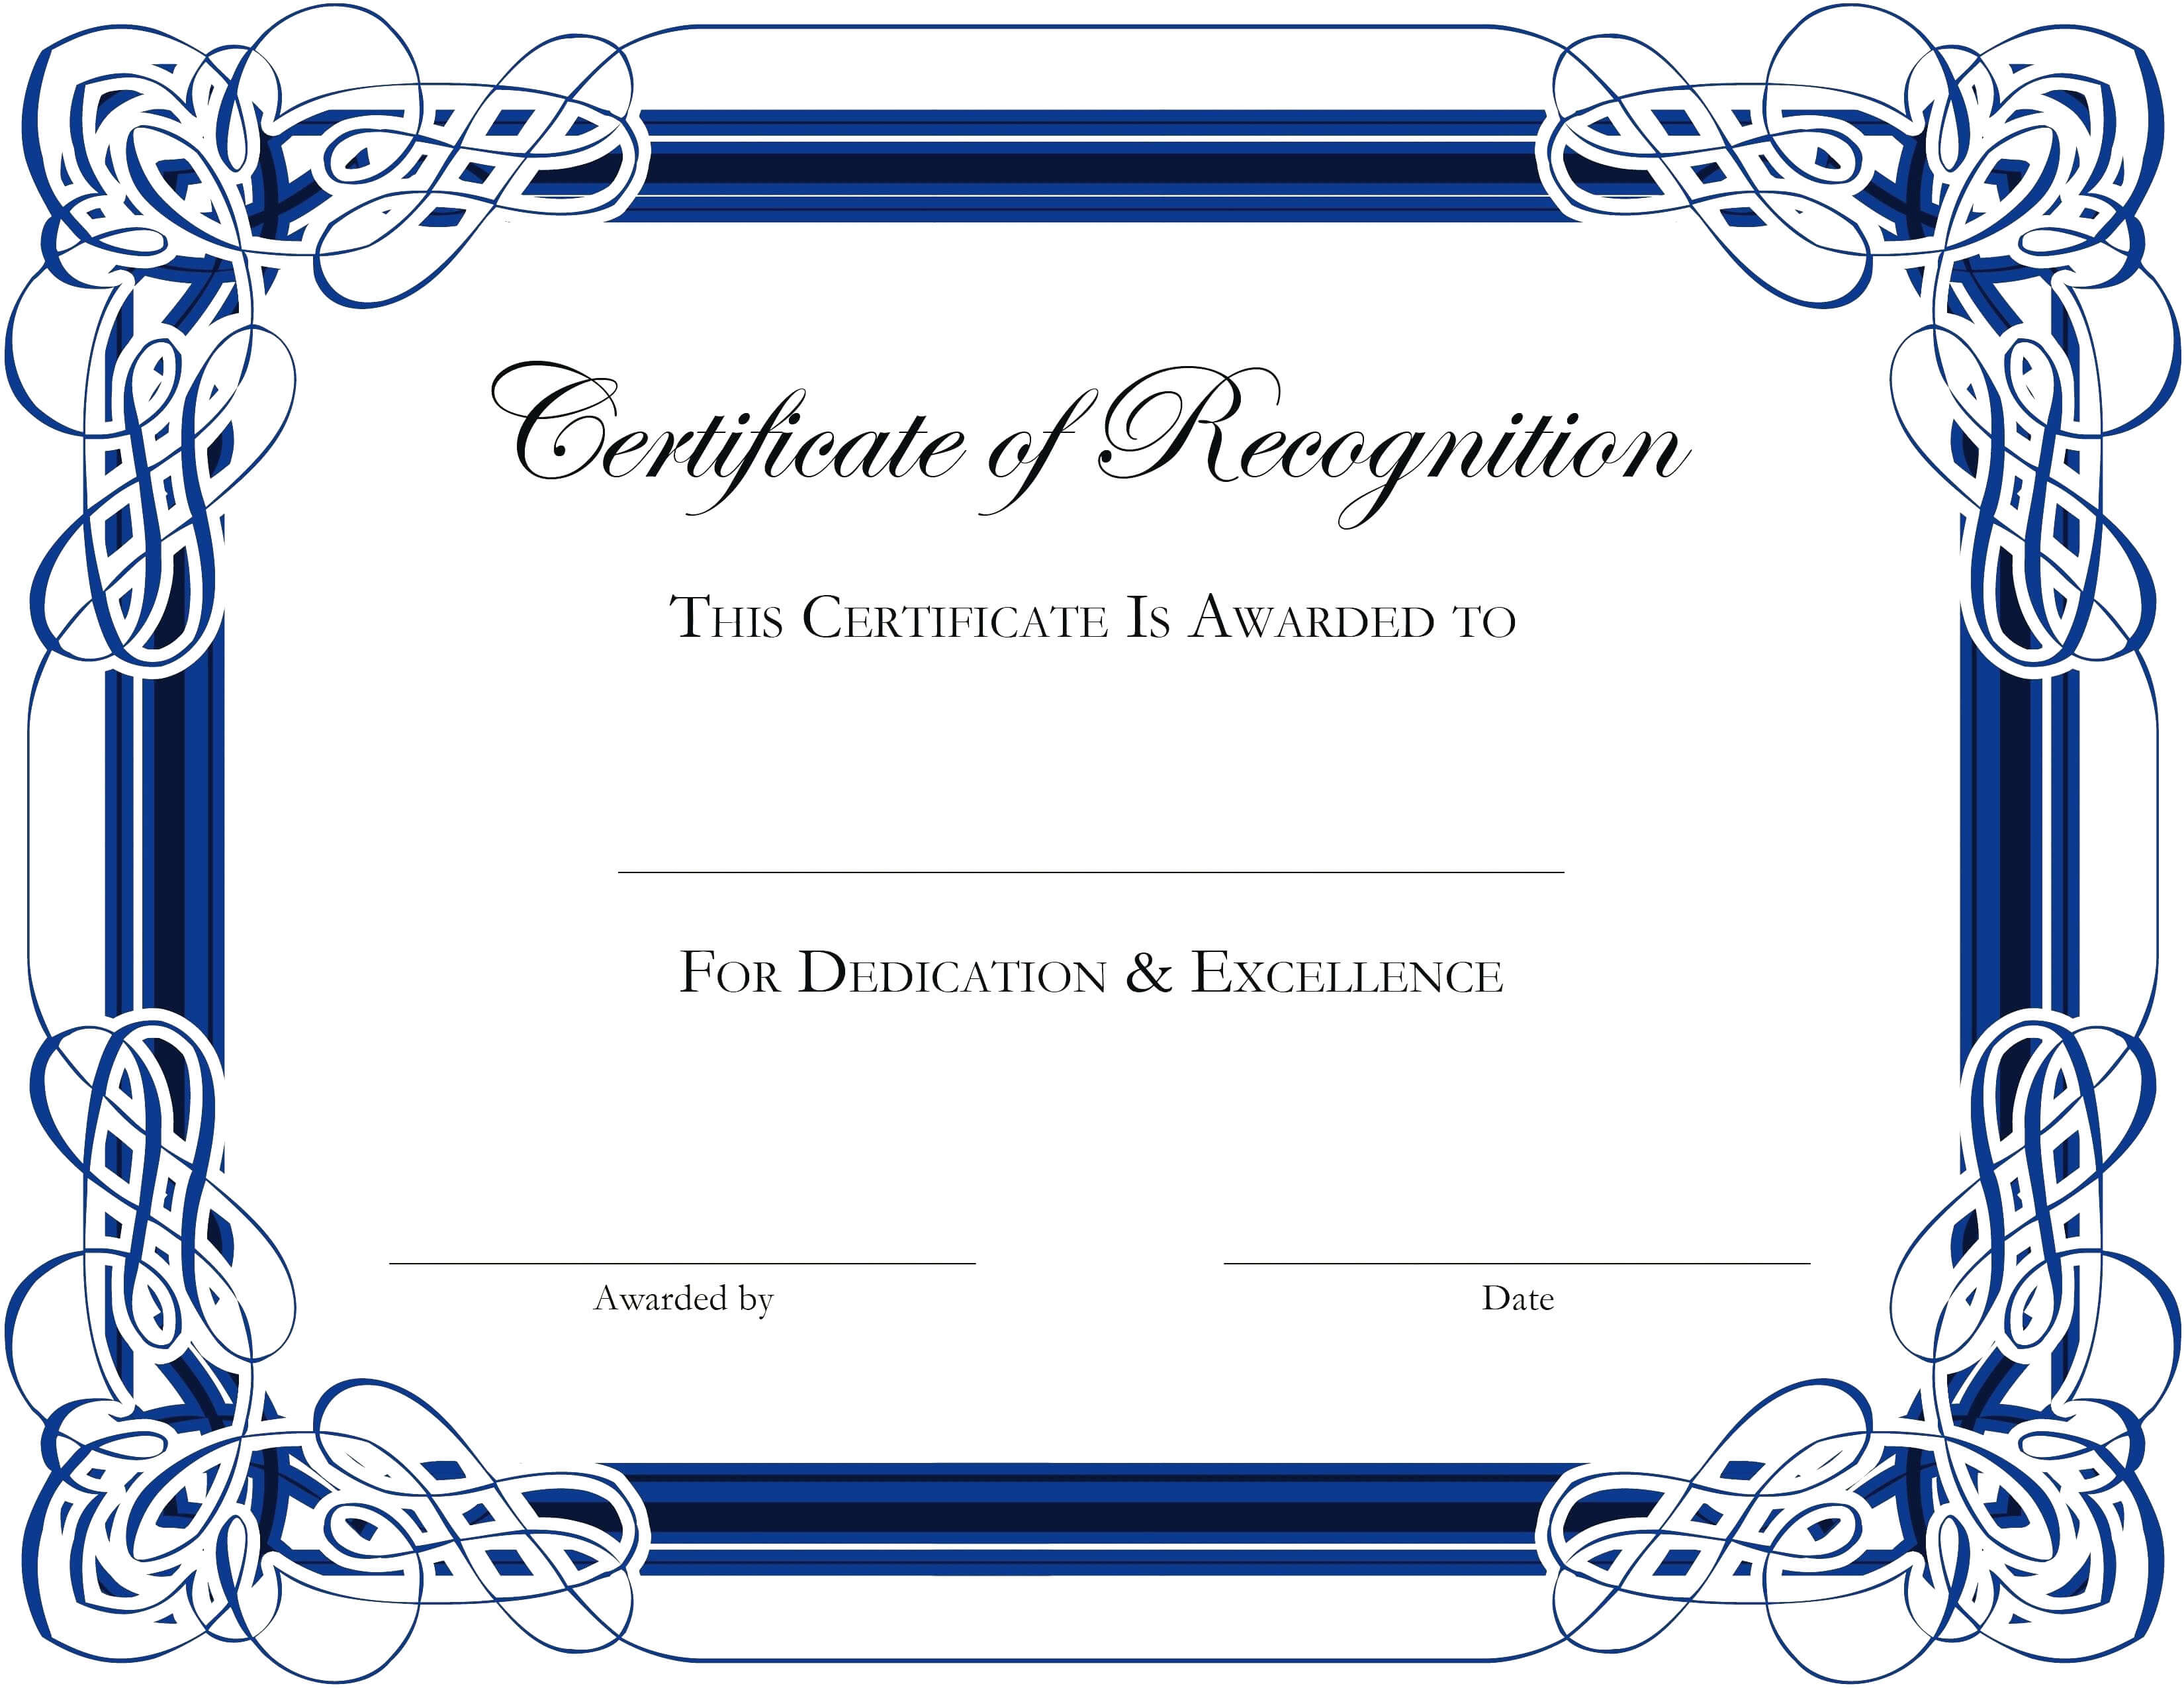 Certificate Templates In Word 2007 | Certificatetemplateword In Award Certificate Templates Word 2007